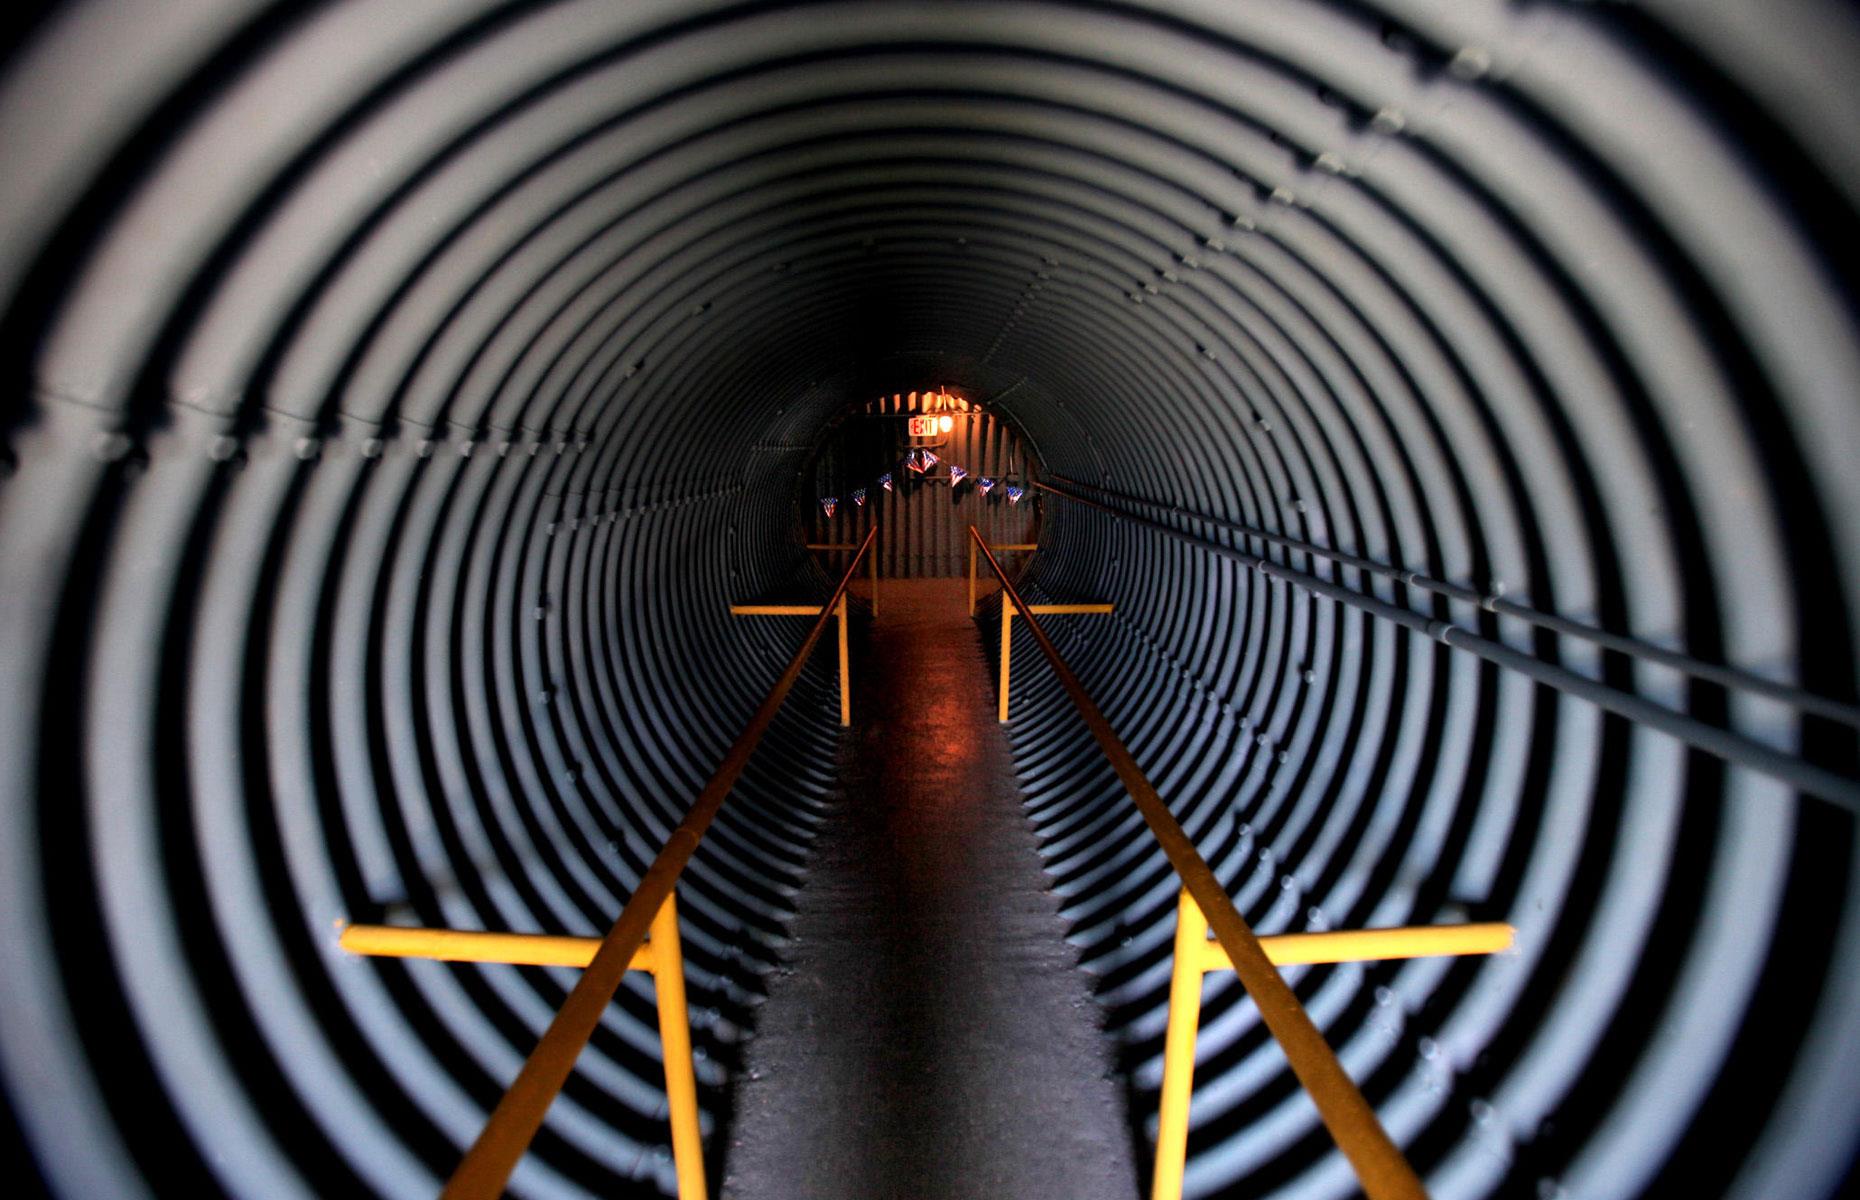 <p>Covered with 12 feet of earth and layers of concrete and lead, the bunker itself is located through a 40-foot-long corrugated metal tunnel, featuring a sharp 90-degree bend to mitigate the effects of a nuclear blast. While the installation wouldn't have survived a direct hit, it would have protected its occupants from a more distant blast, not to mention the ensuing fallout, for up to 30 days.</p>